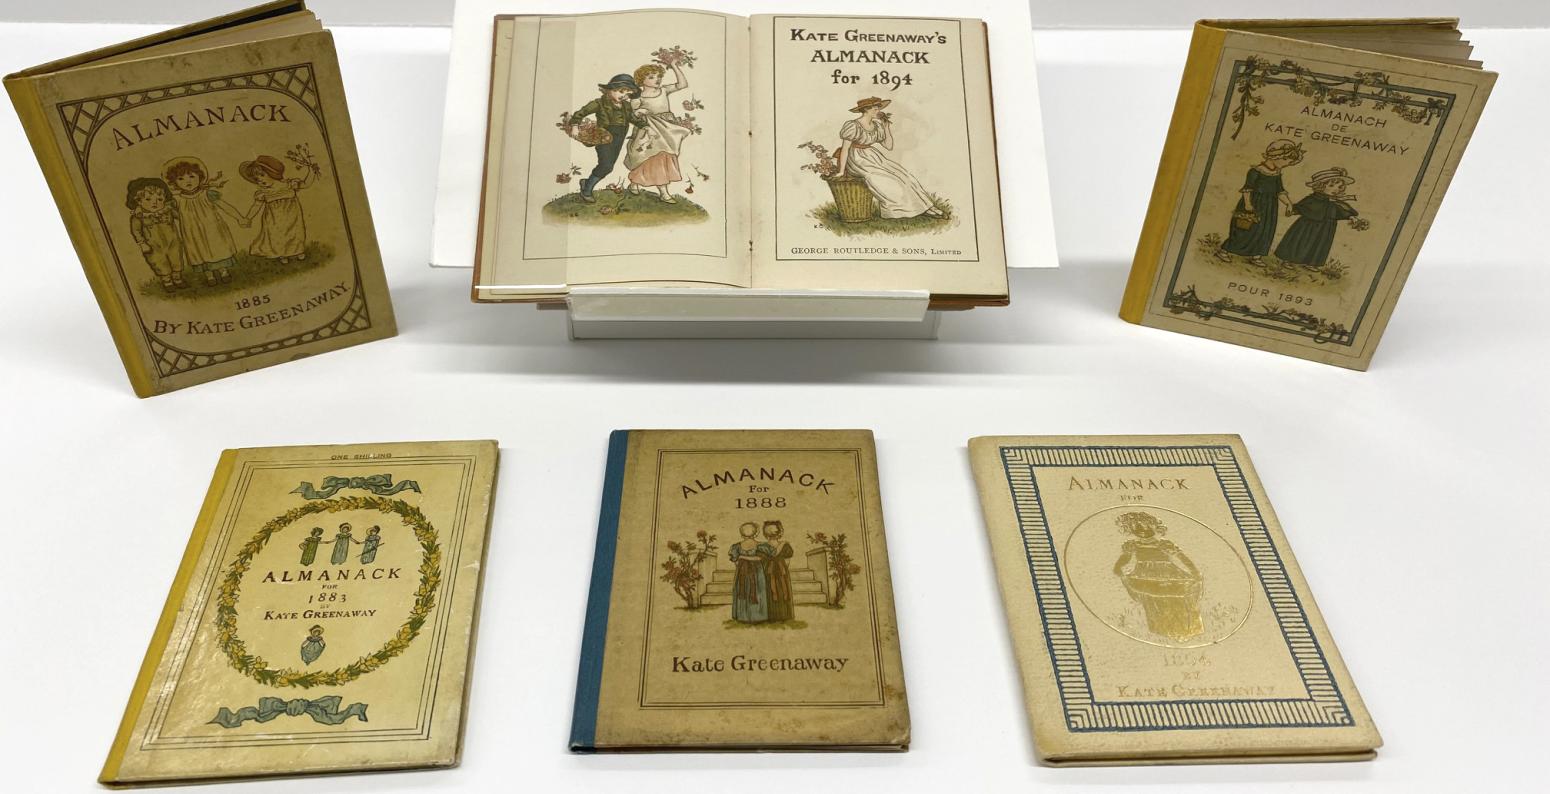 Assortment of books from the BERL collection